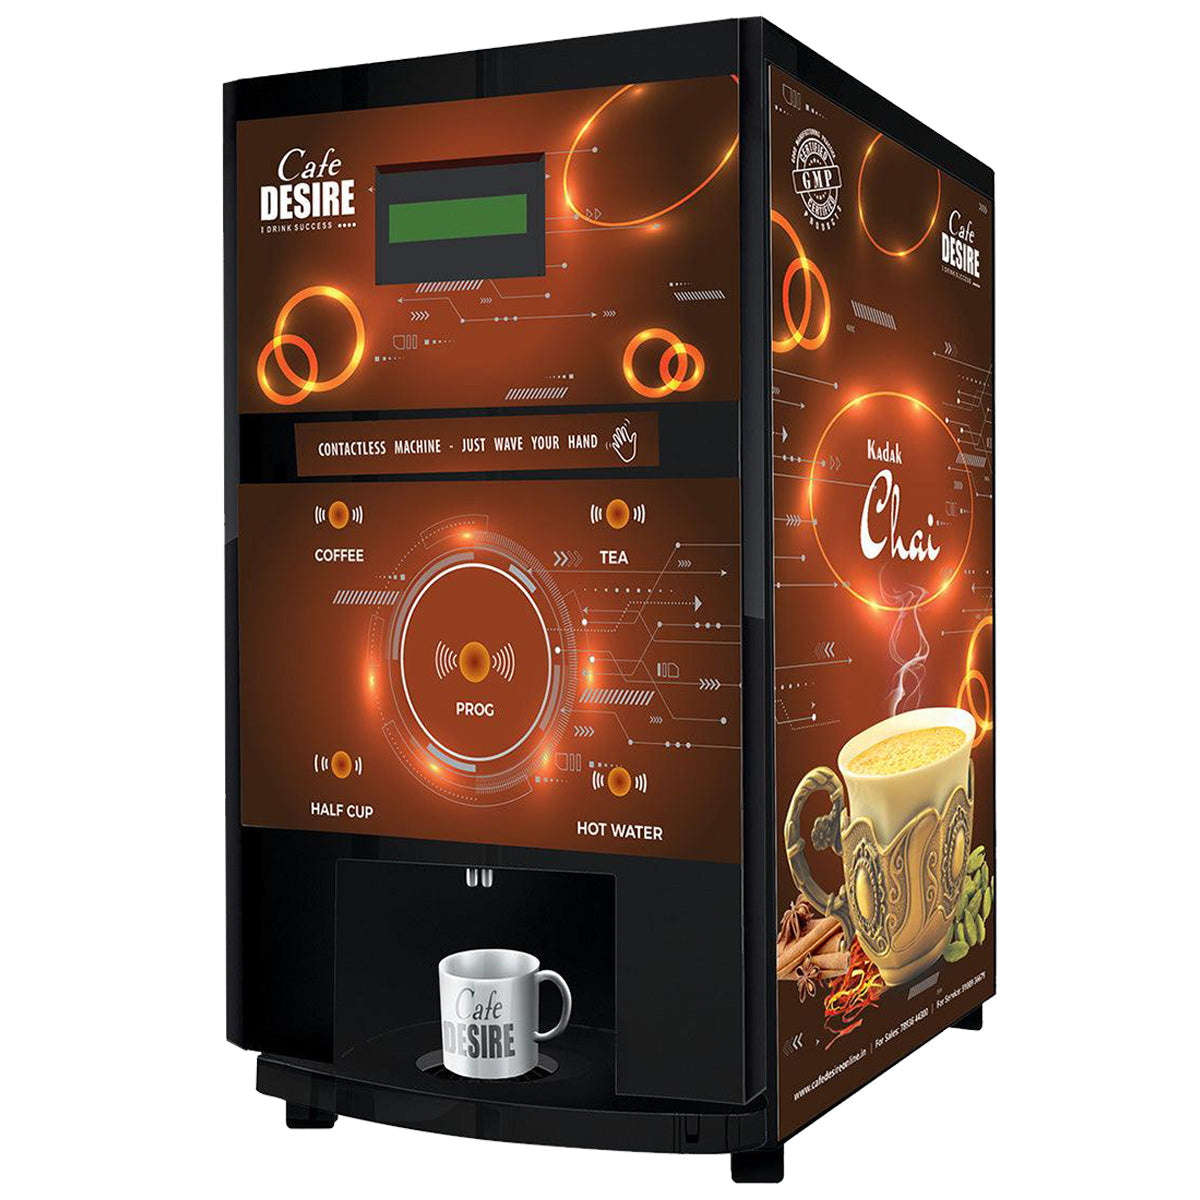 Contactless Sensor Based Coffee Machine - 2 Lane | Automatic Tea & Coffee Premix Vending Machine | For Offices, Shops & Smart Homes | Make 2 types | Just wave your hand - cafedesireonline.com